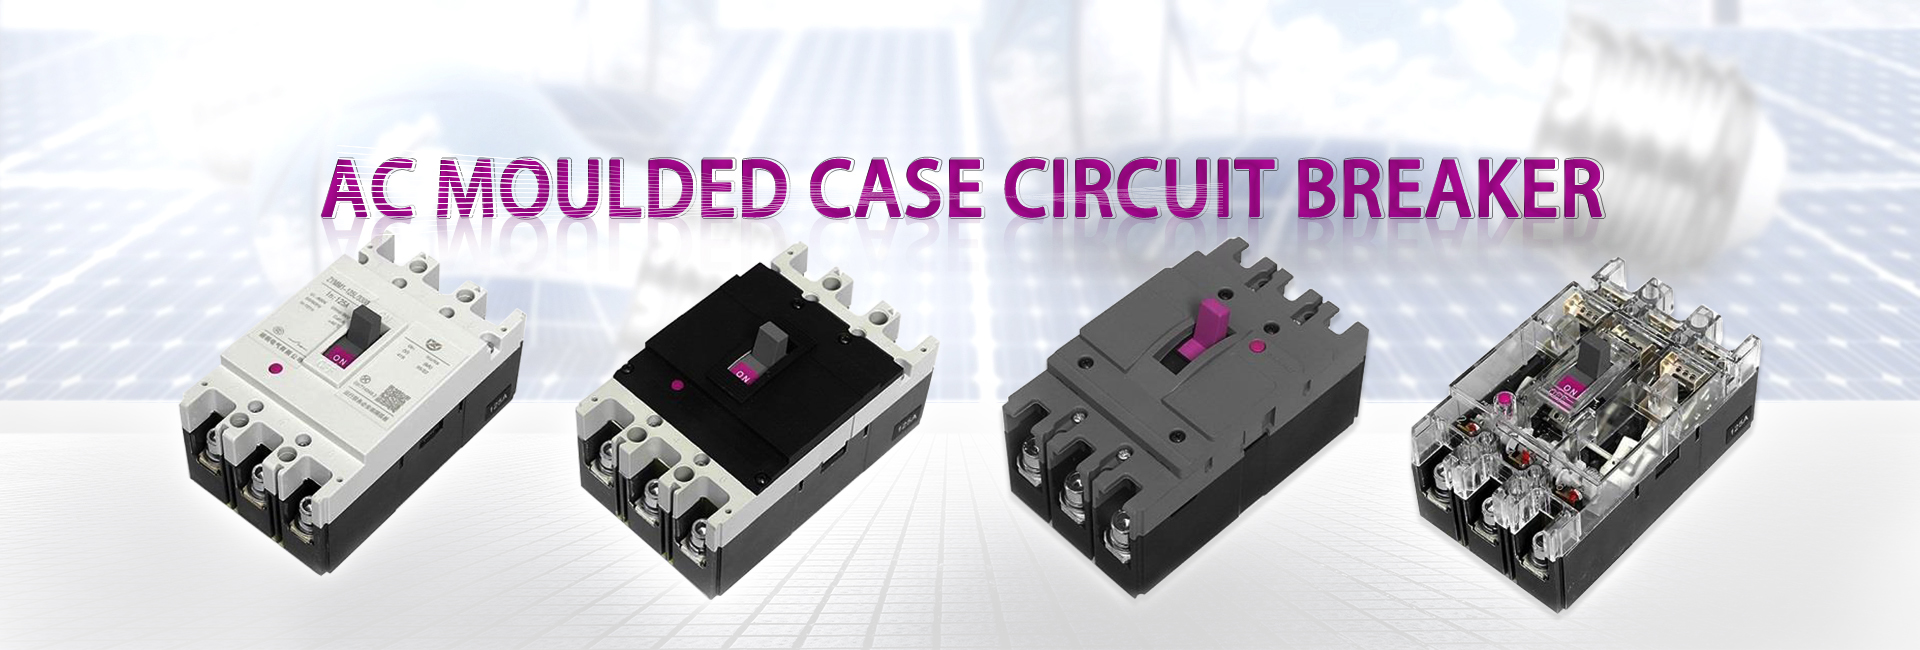 Moulded Case Circuit Breaker with Earth Leakage Protection